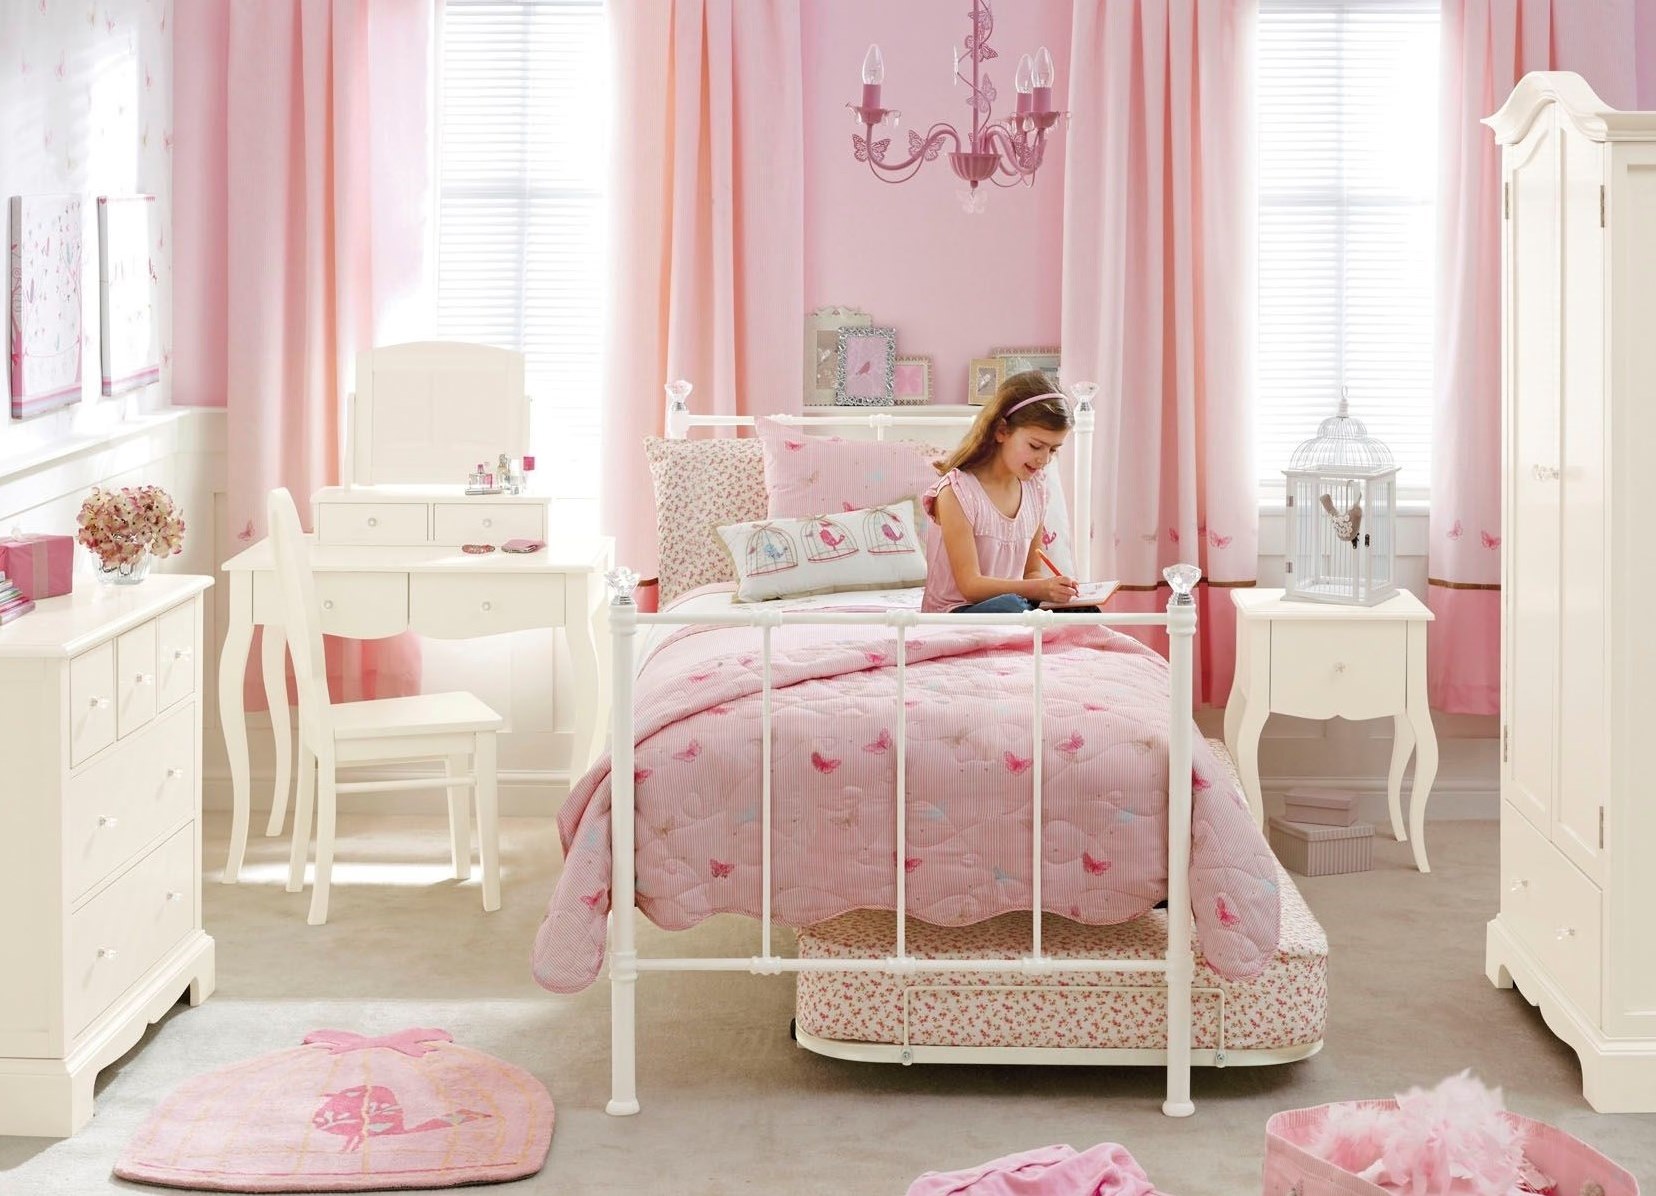 version of a beautiful decor for a girl’s nursery